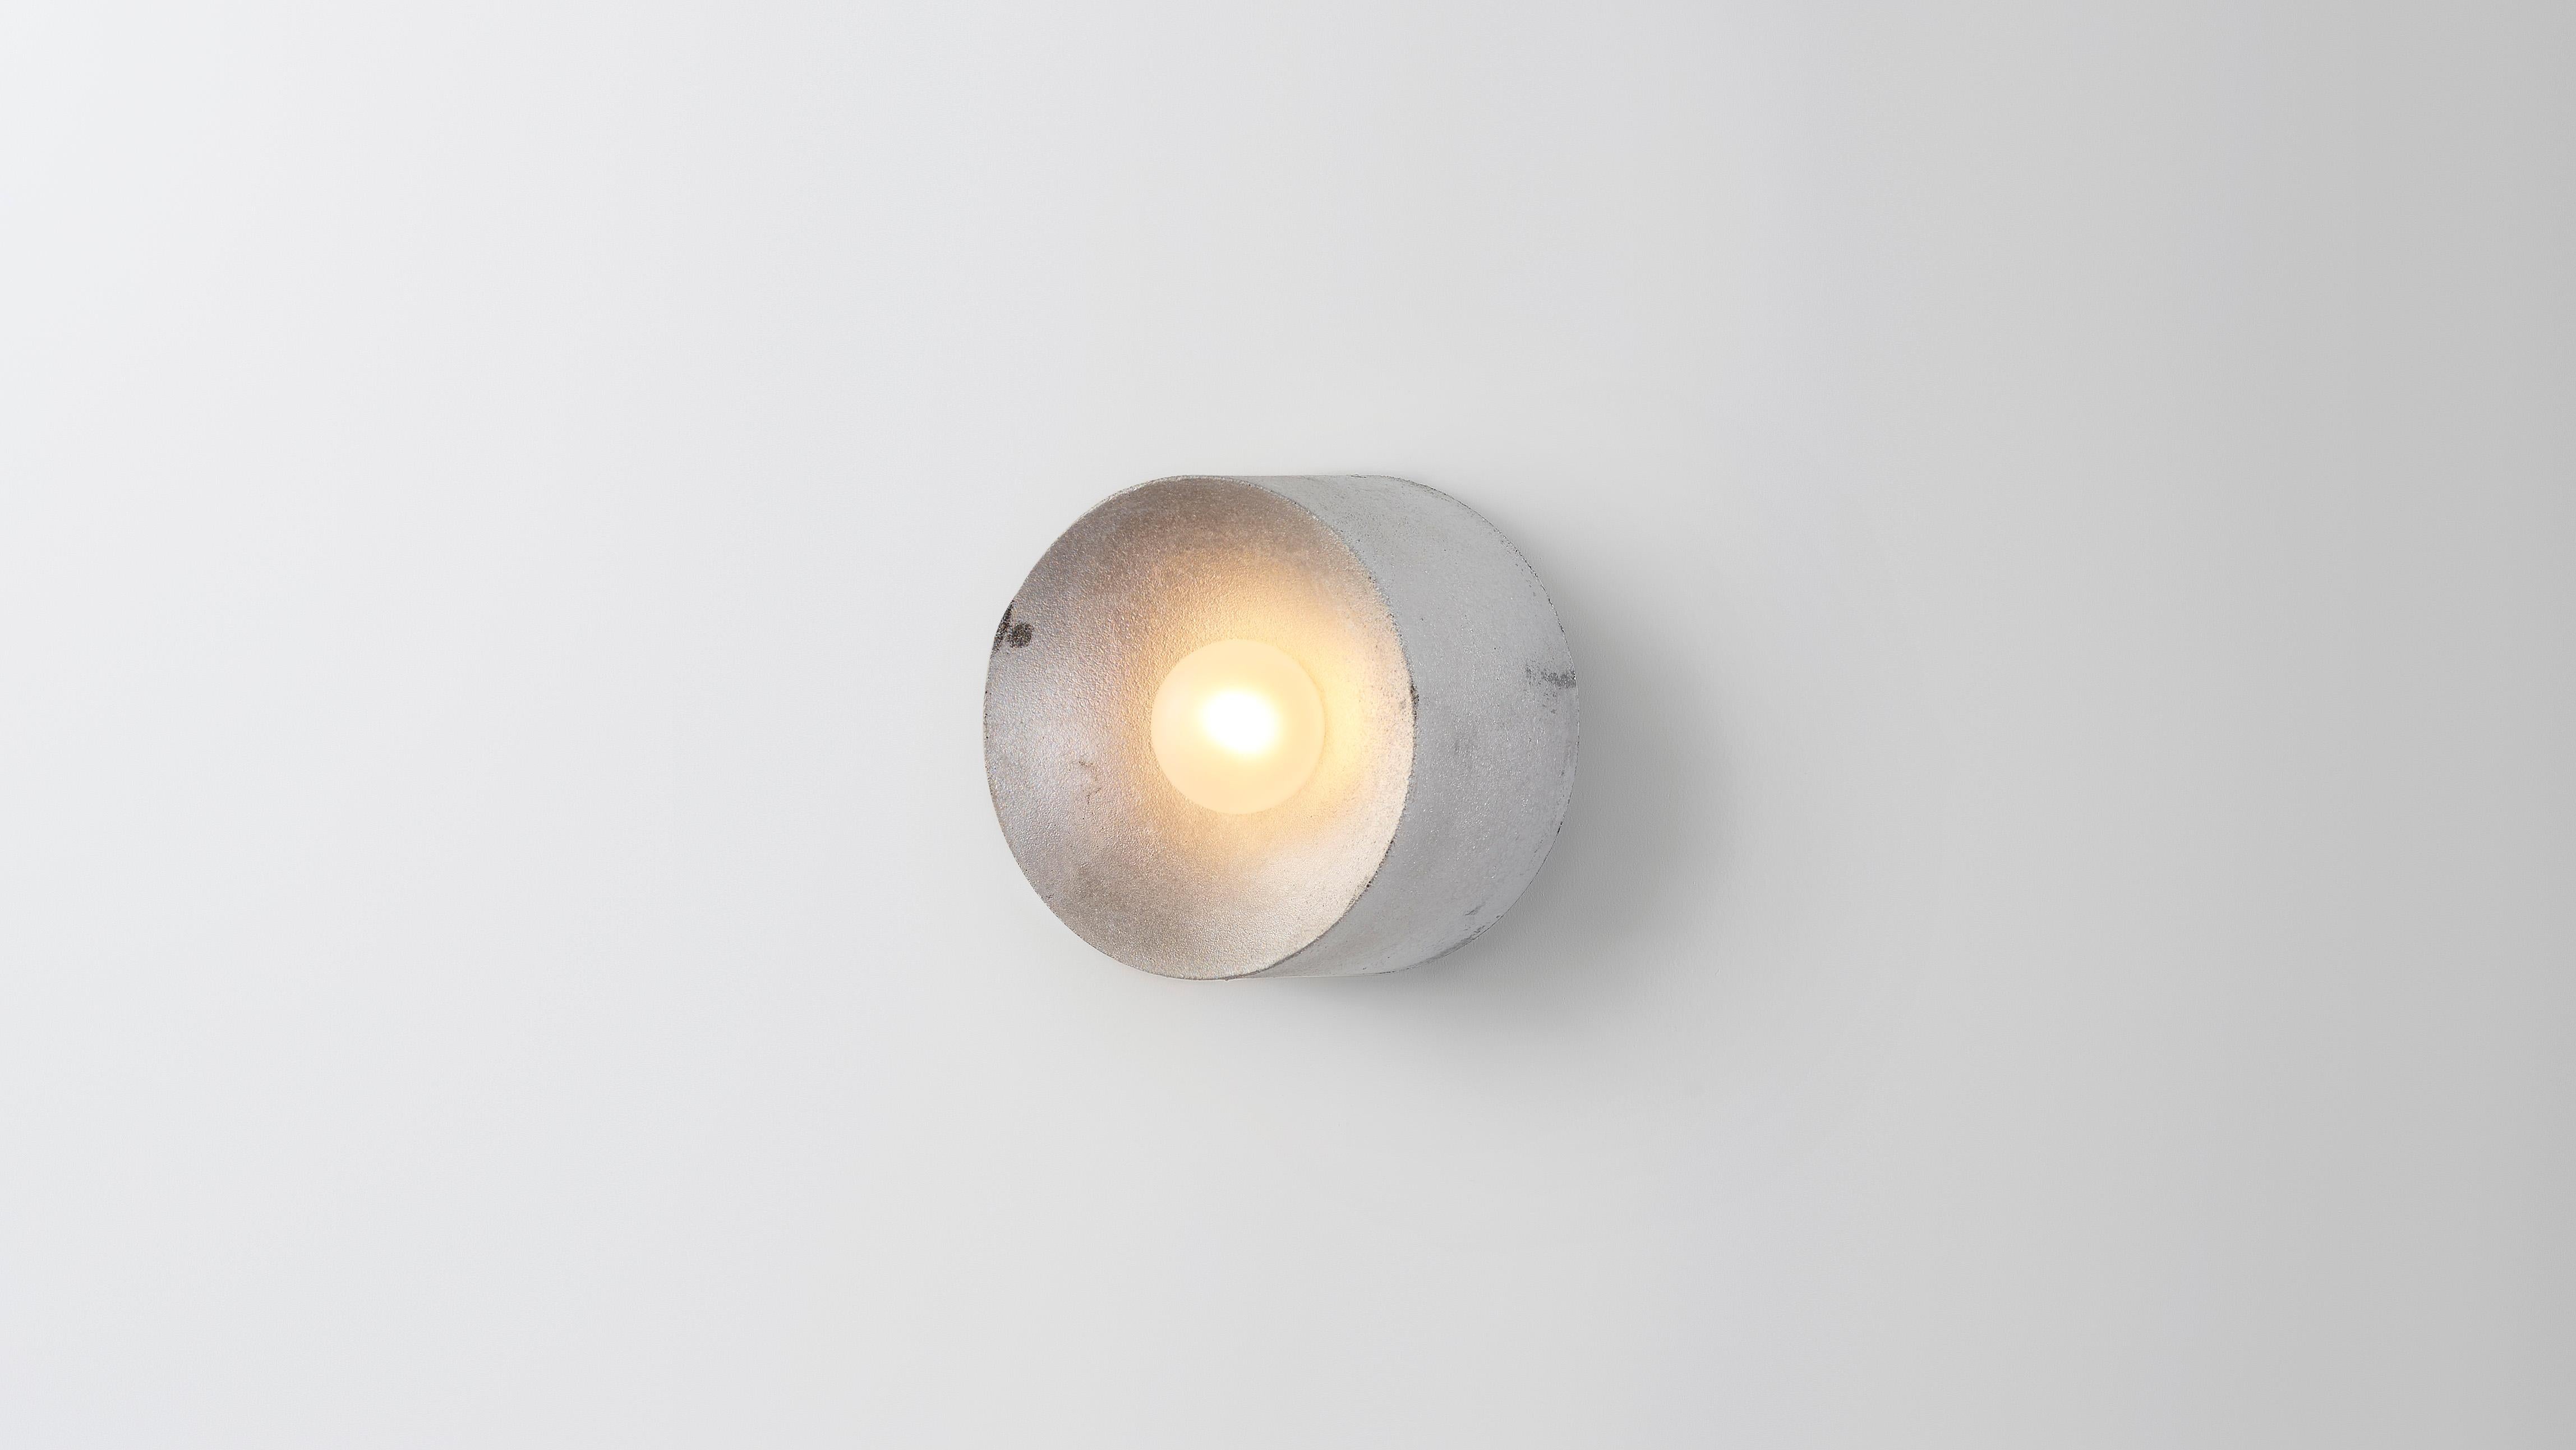 Anton mini in aluminum by Volker Haug 
Anton series
Dimensions: Ø 13 x D 8 cm.
Materials: Cast aluminum
Finish: Raw
Lamp: G9 LED (240V / 120V US). 12V option available.
Glass bulb: 4.5 cm ø, Frosted
Weight: 1kg.

Anton mini (Ø13 cm) is cast as raw